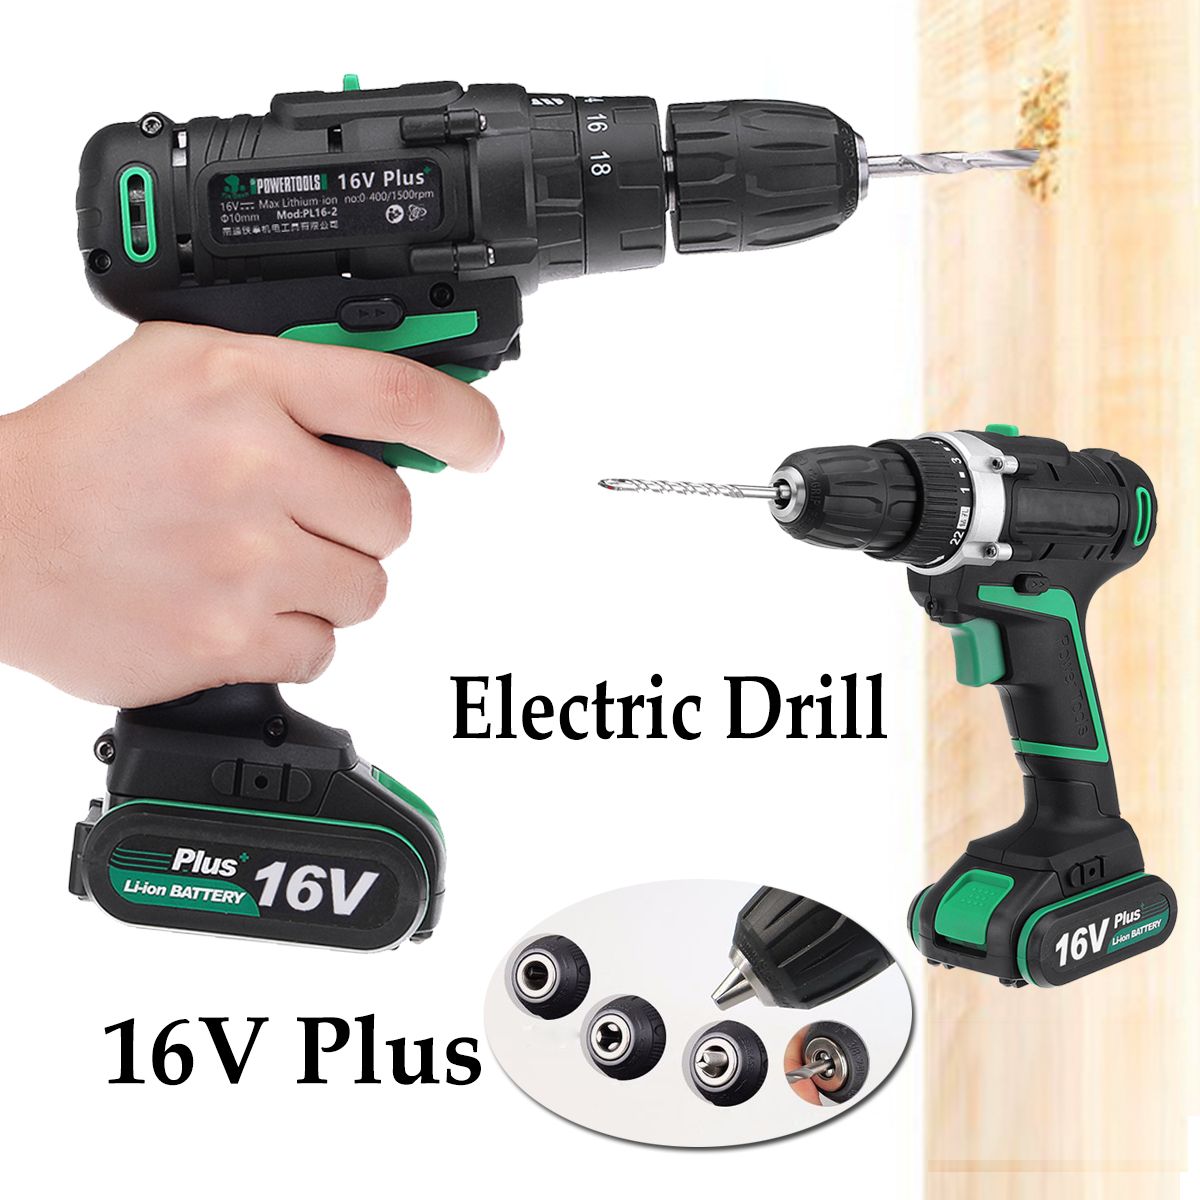 AC-100-240V-Lithium-Cordless-Electric-Screwdriver-Screw-Drill-Driver-Tool-15Ah-1-Charger-1-Battery-1286920